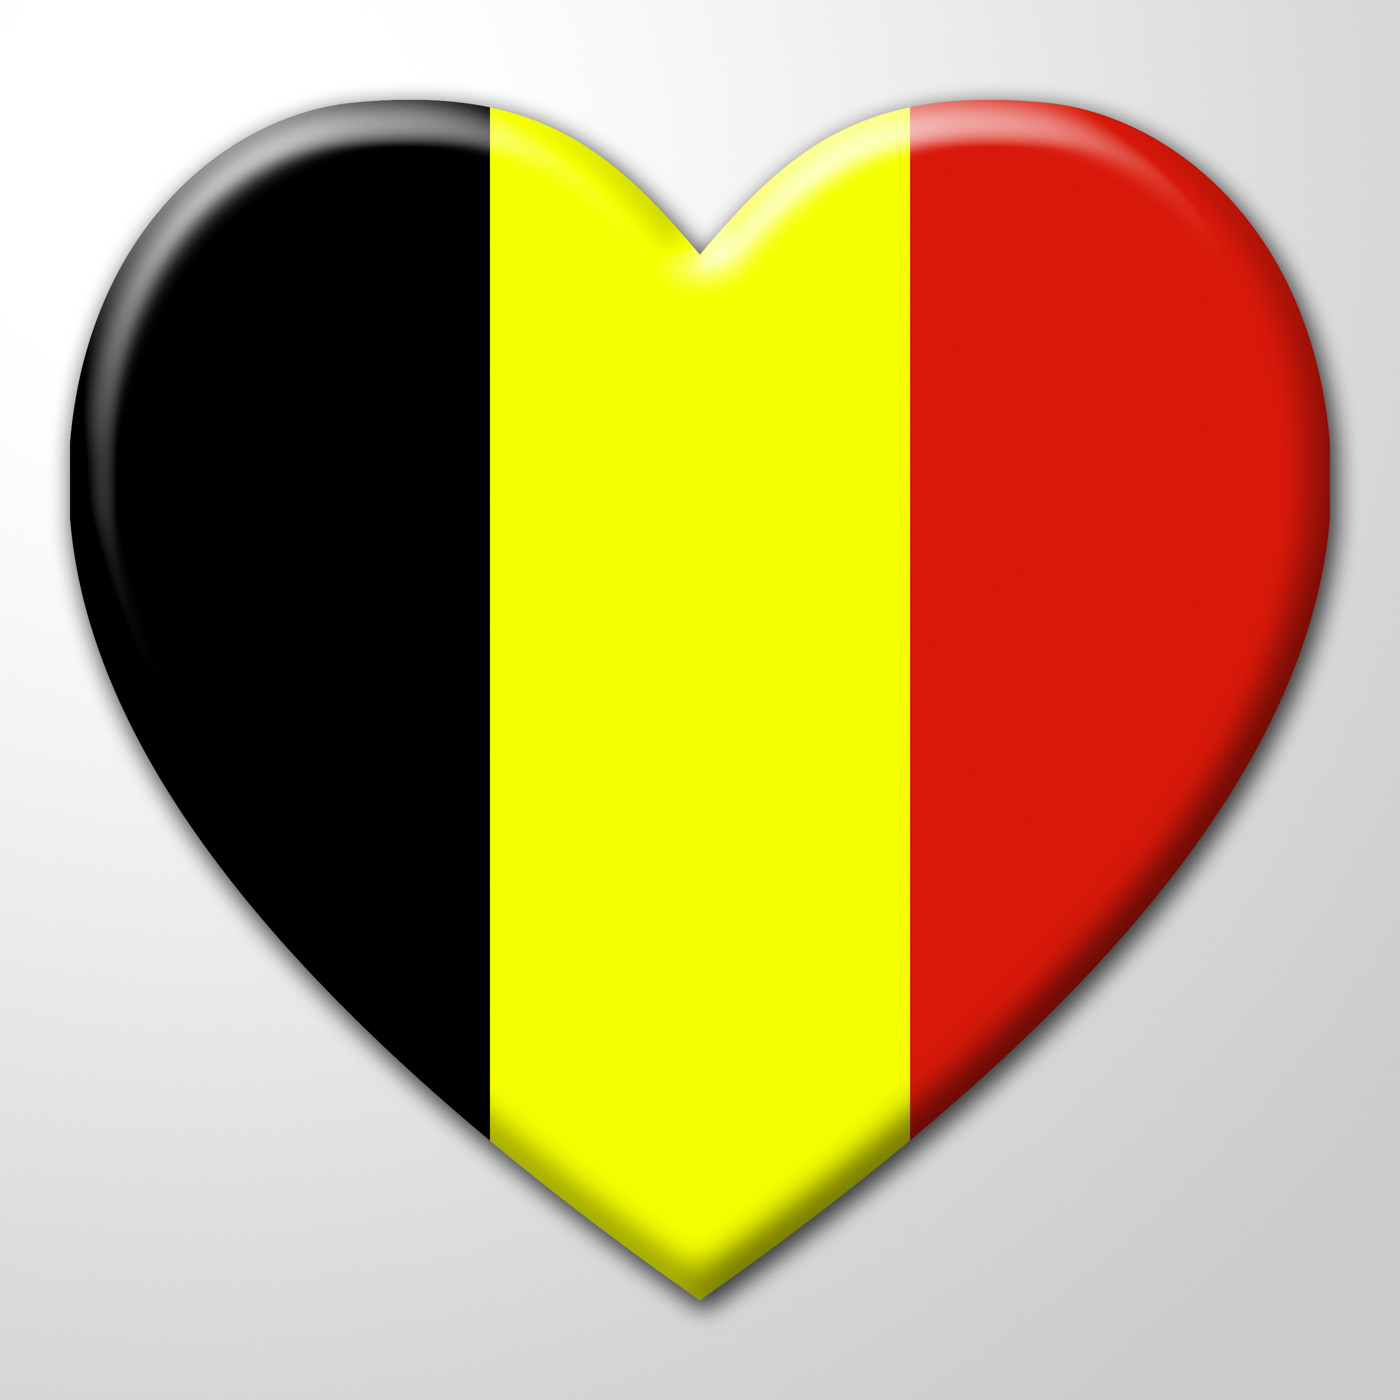 Heart belgium shows valentines day and affection photo